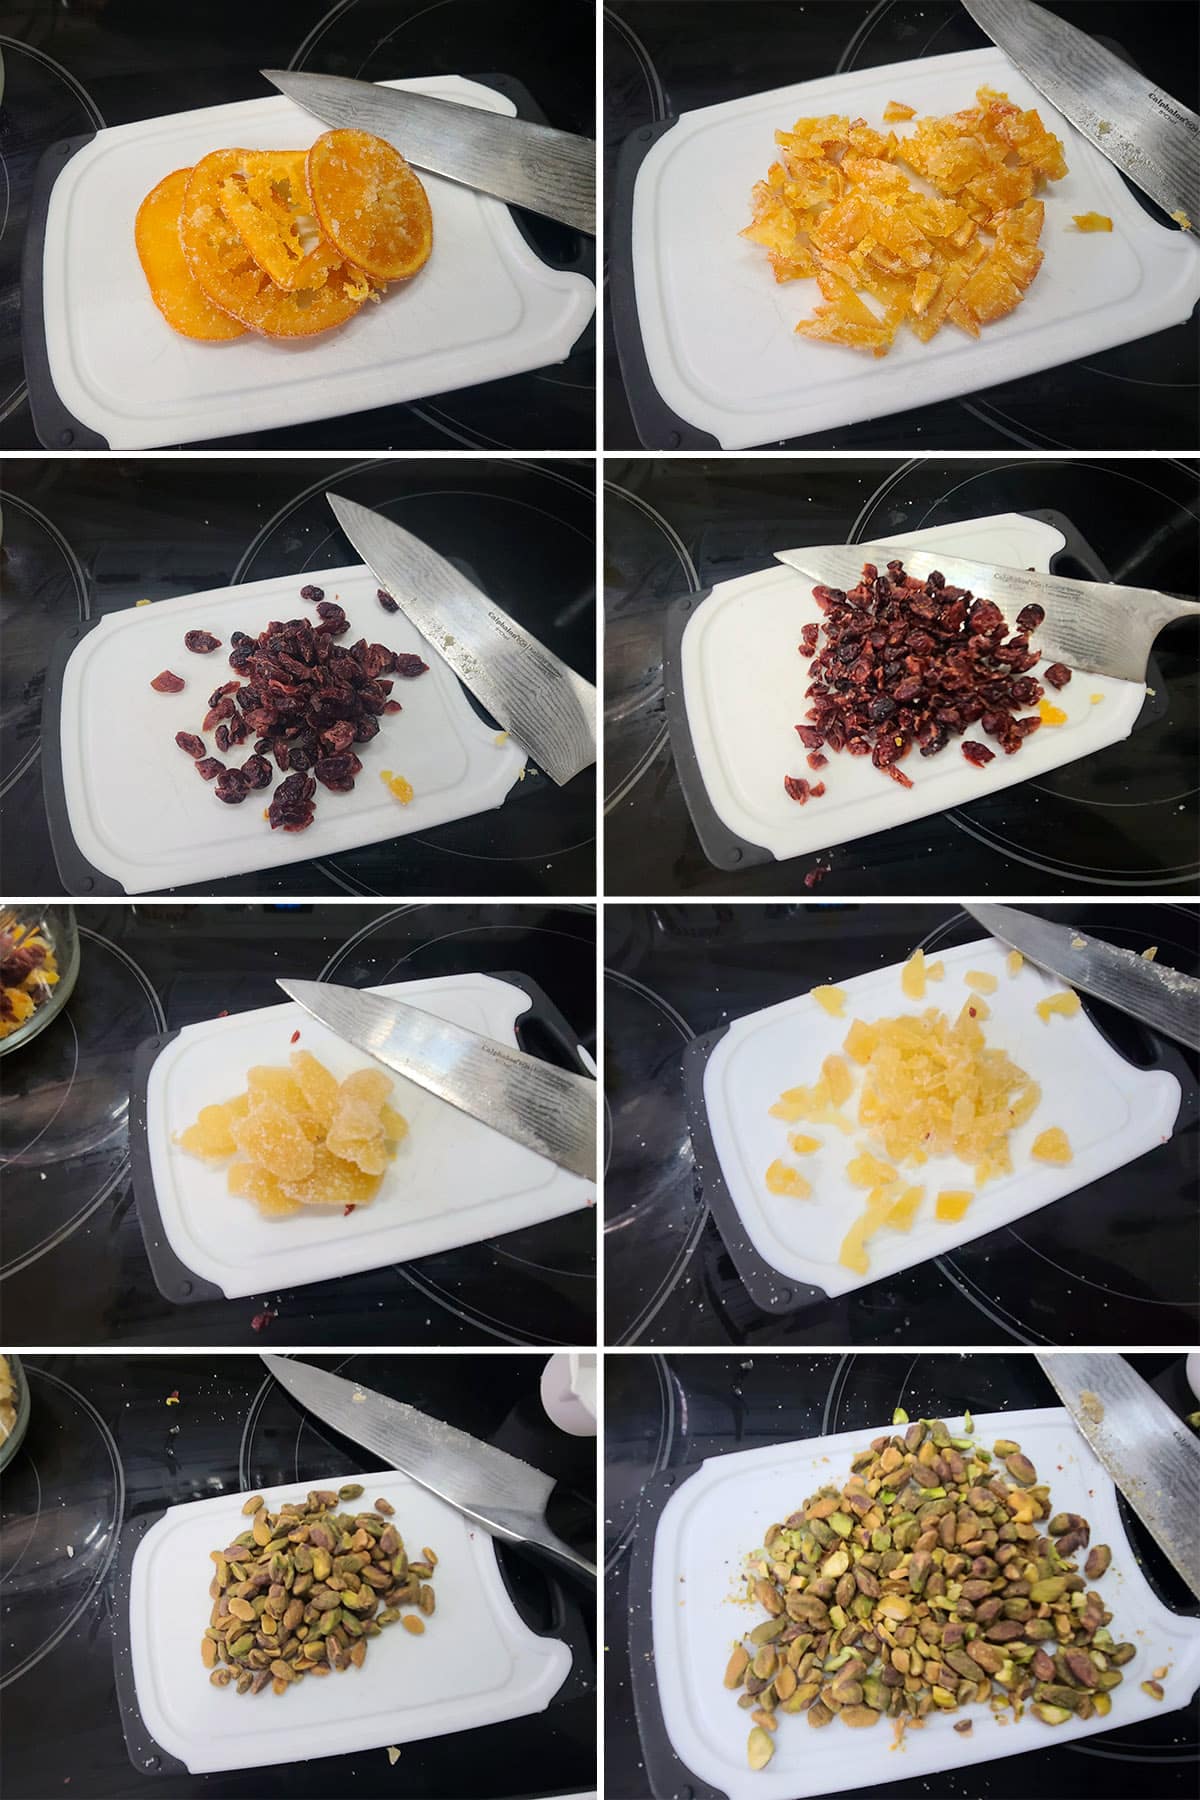 An 8 part image showing the candied orange, crystalized ginger, dried cranberries, and pistachios being chopped into smaller pieces.